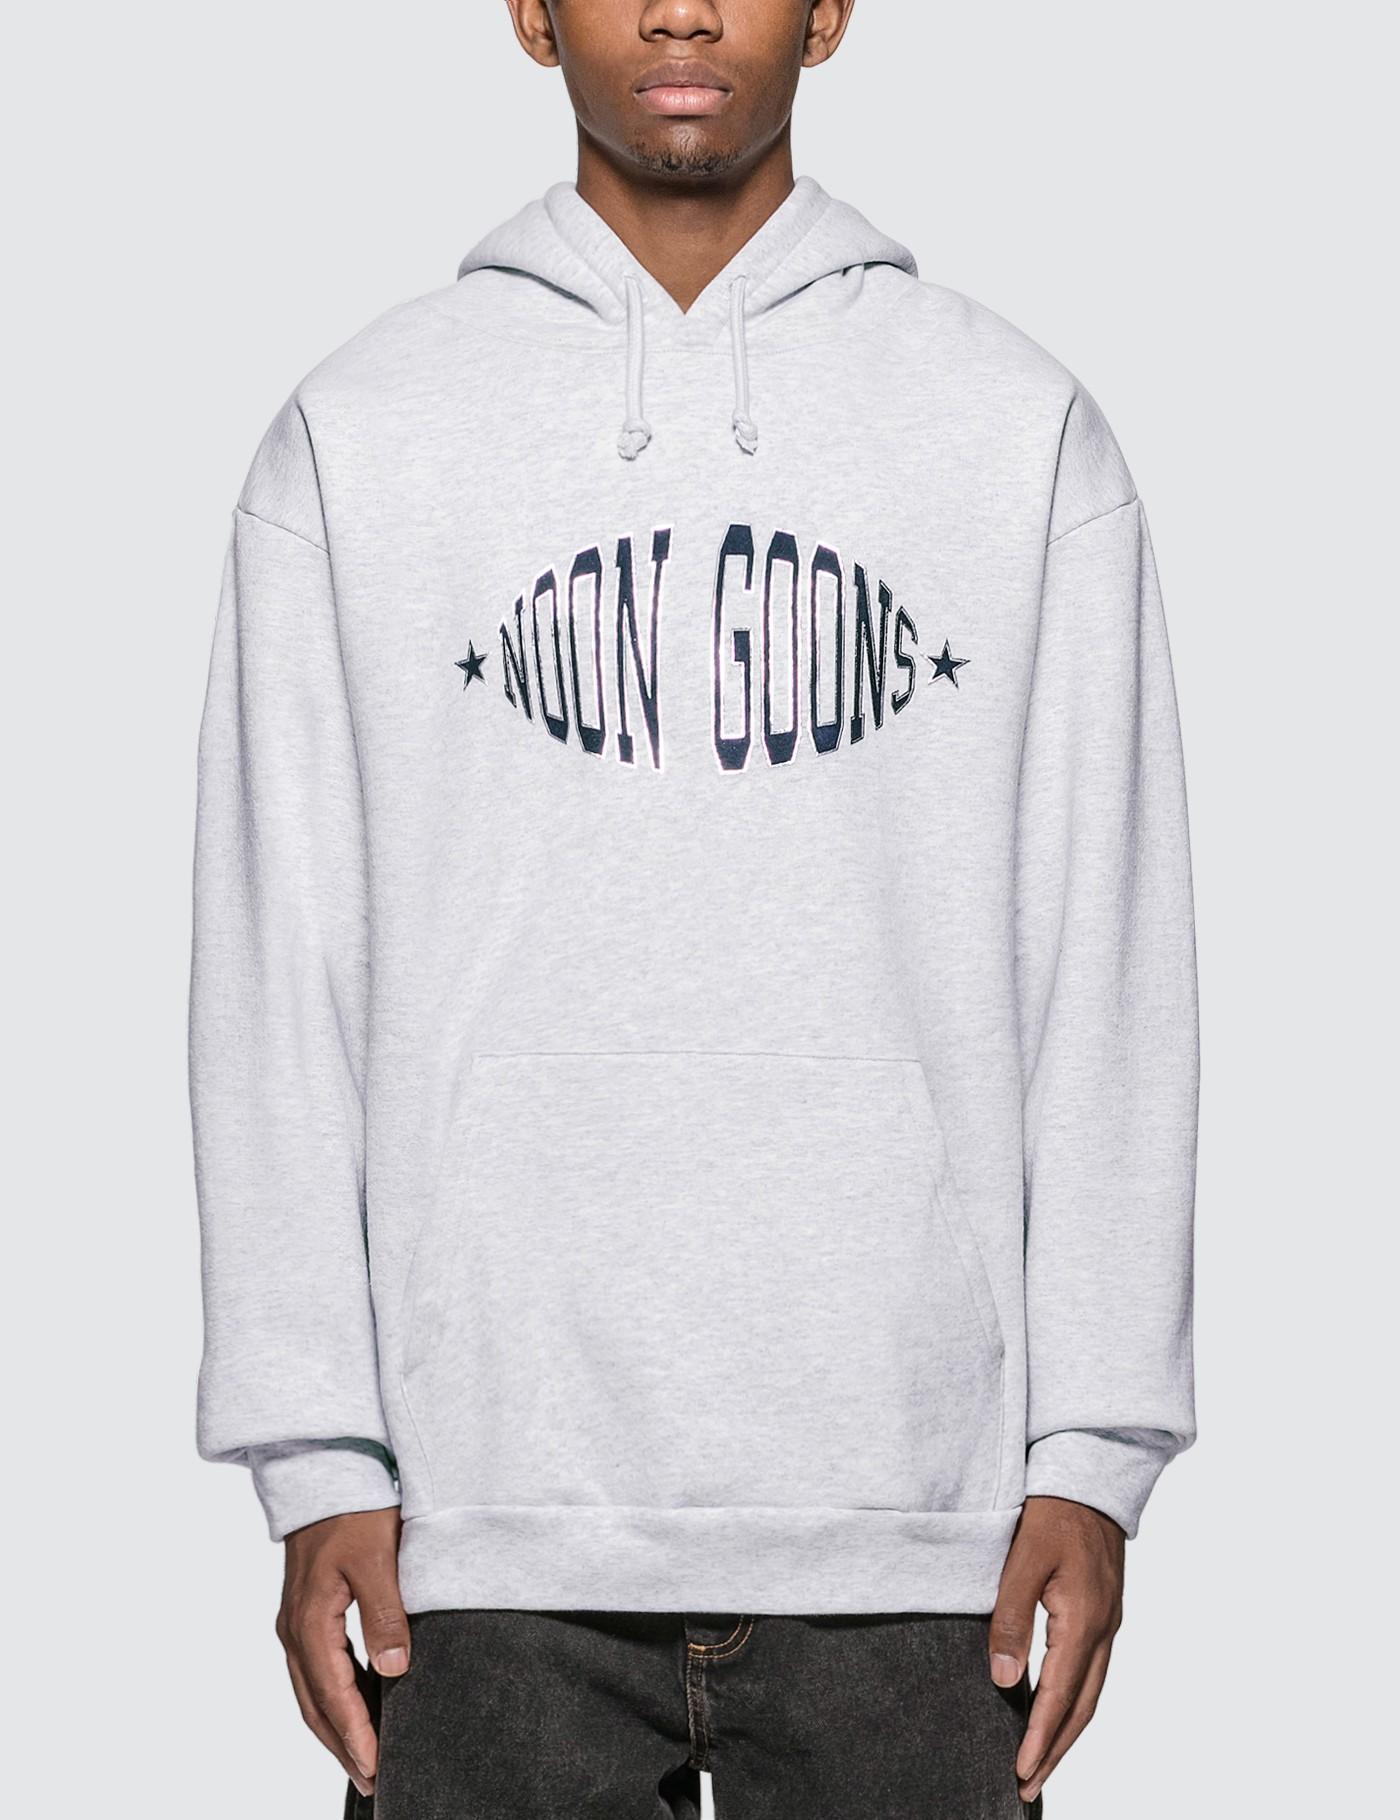 Noon Goons Cotton Team Logo Hoodie in Grey (Gray) for Men - Lyst